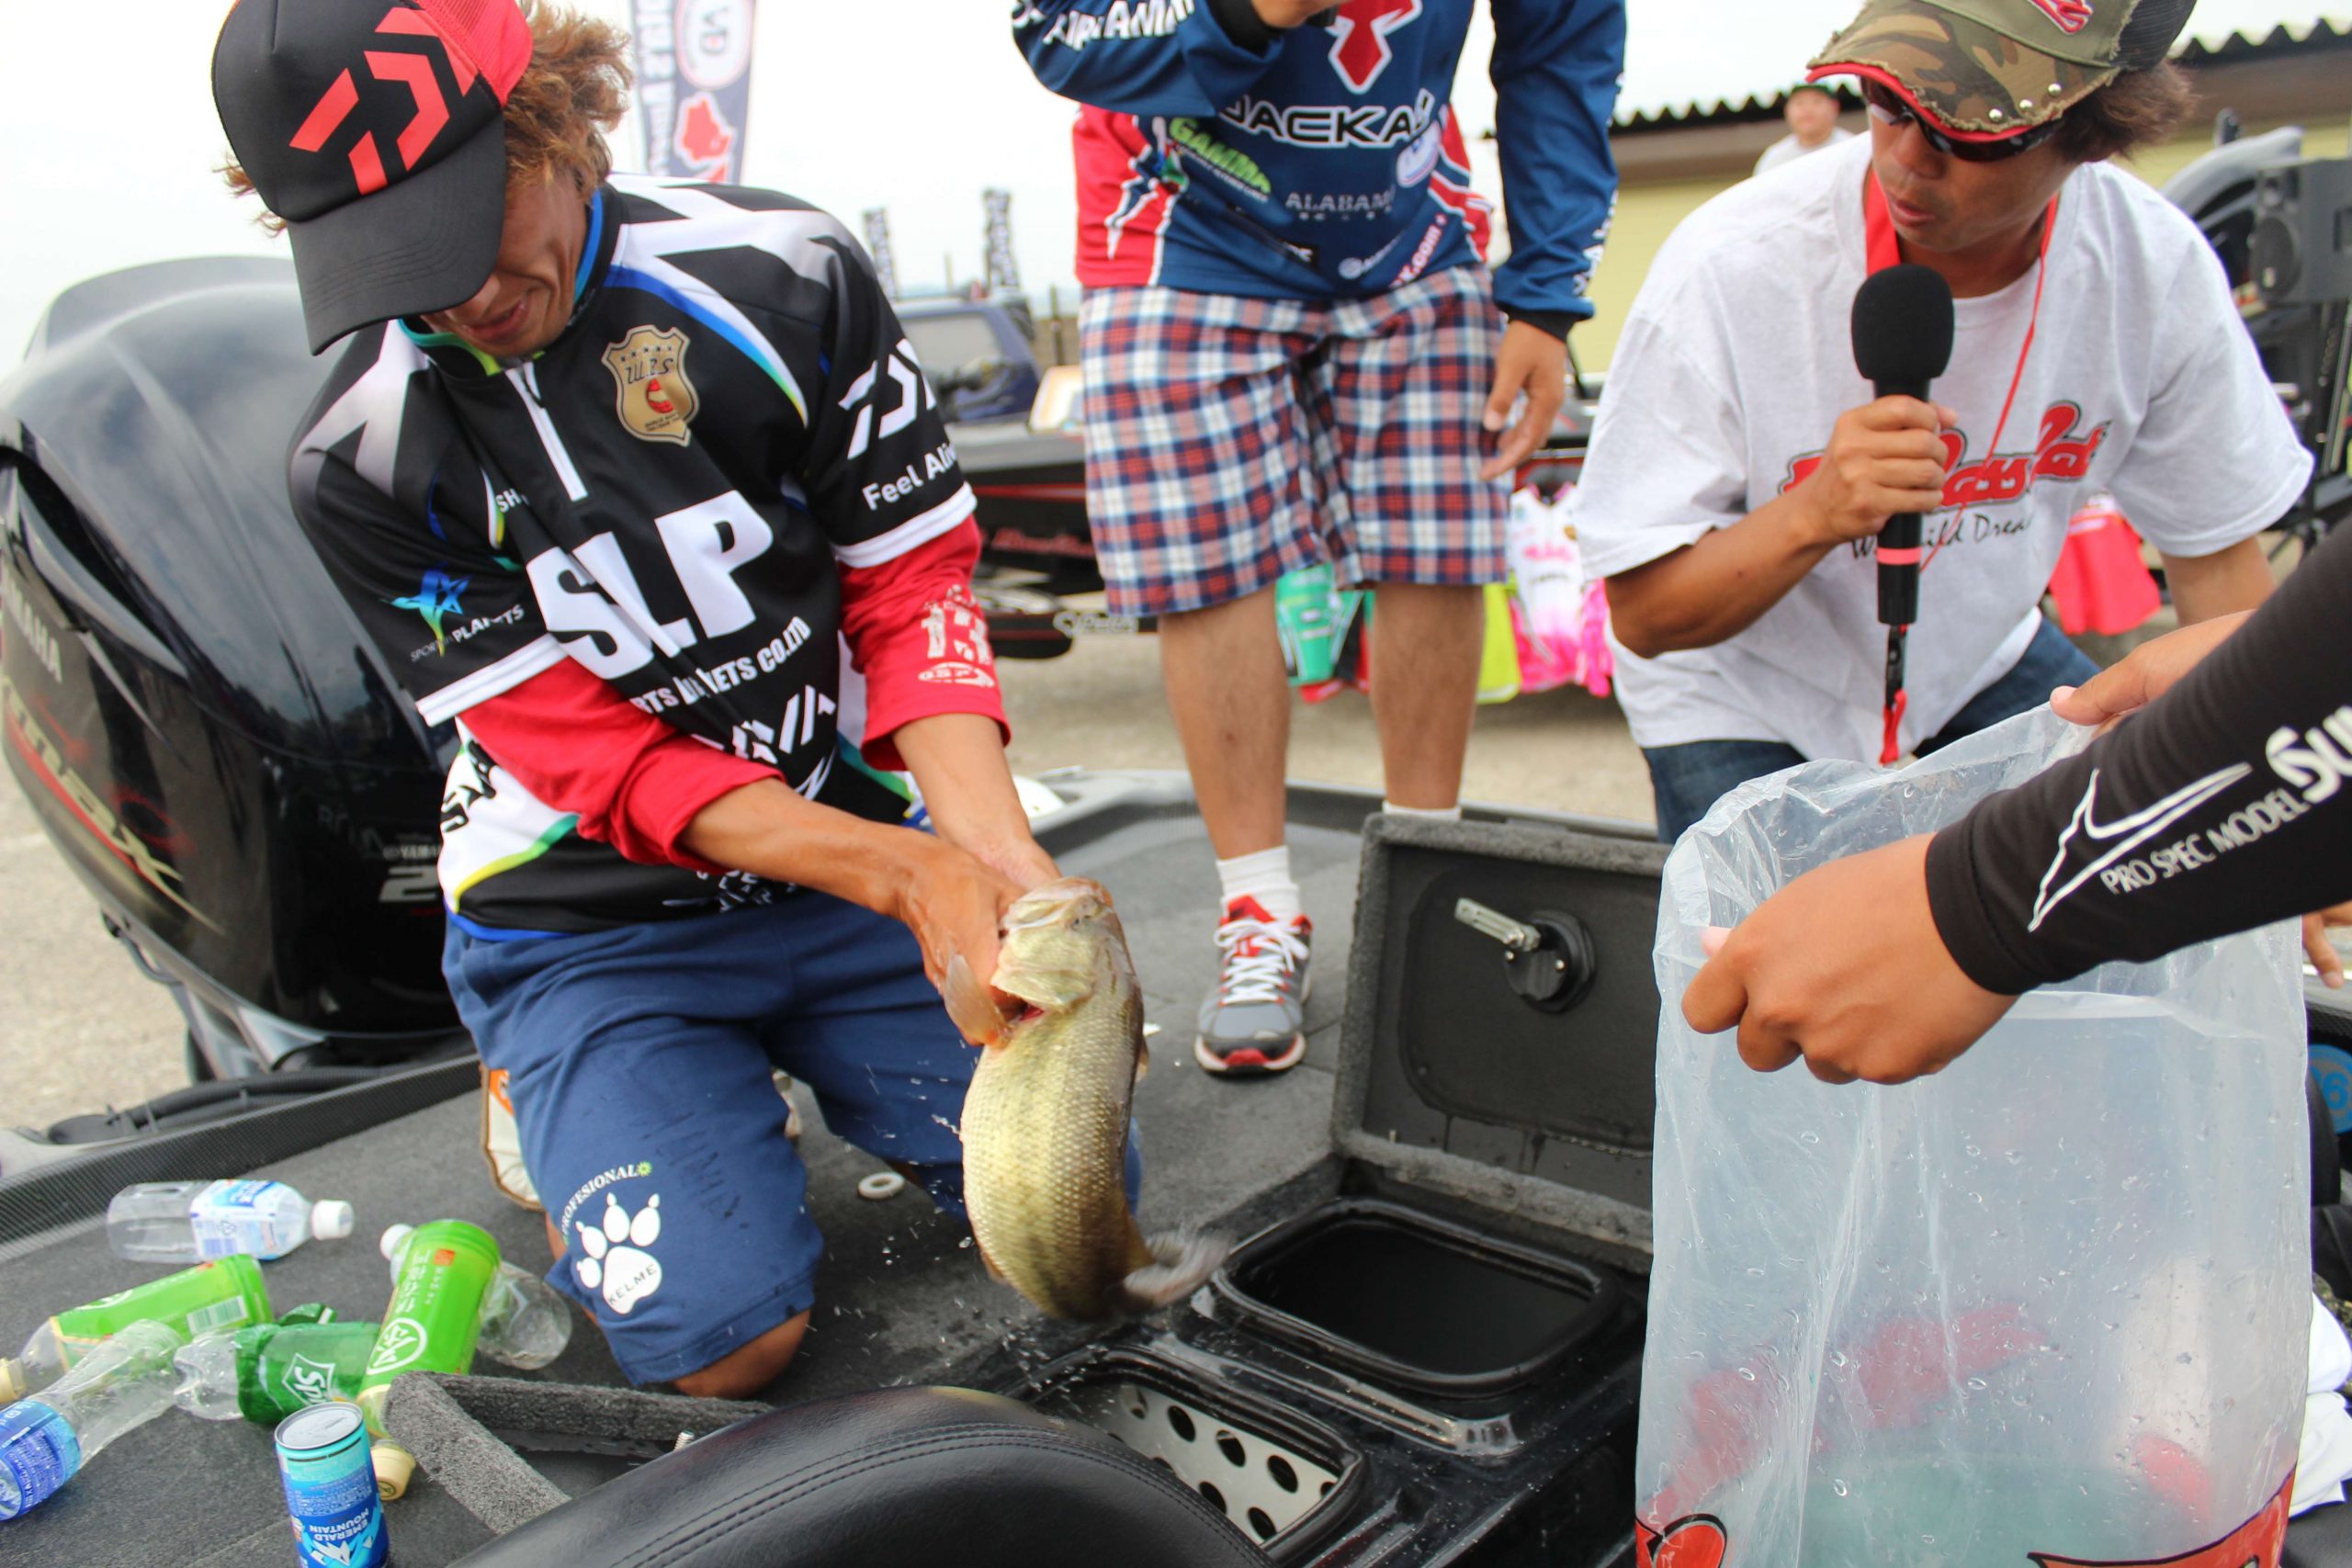 The winning team was the last team to weigh in, and here they are bagging their fish for the drive-through weigh-in.